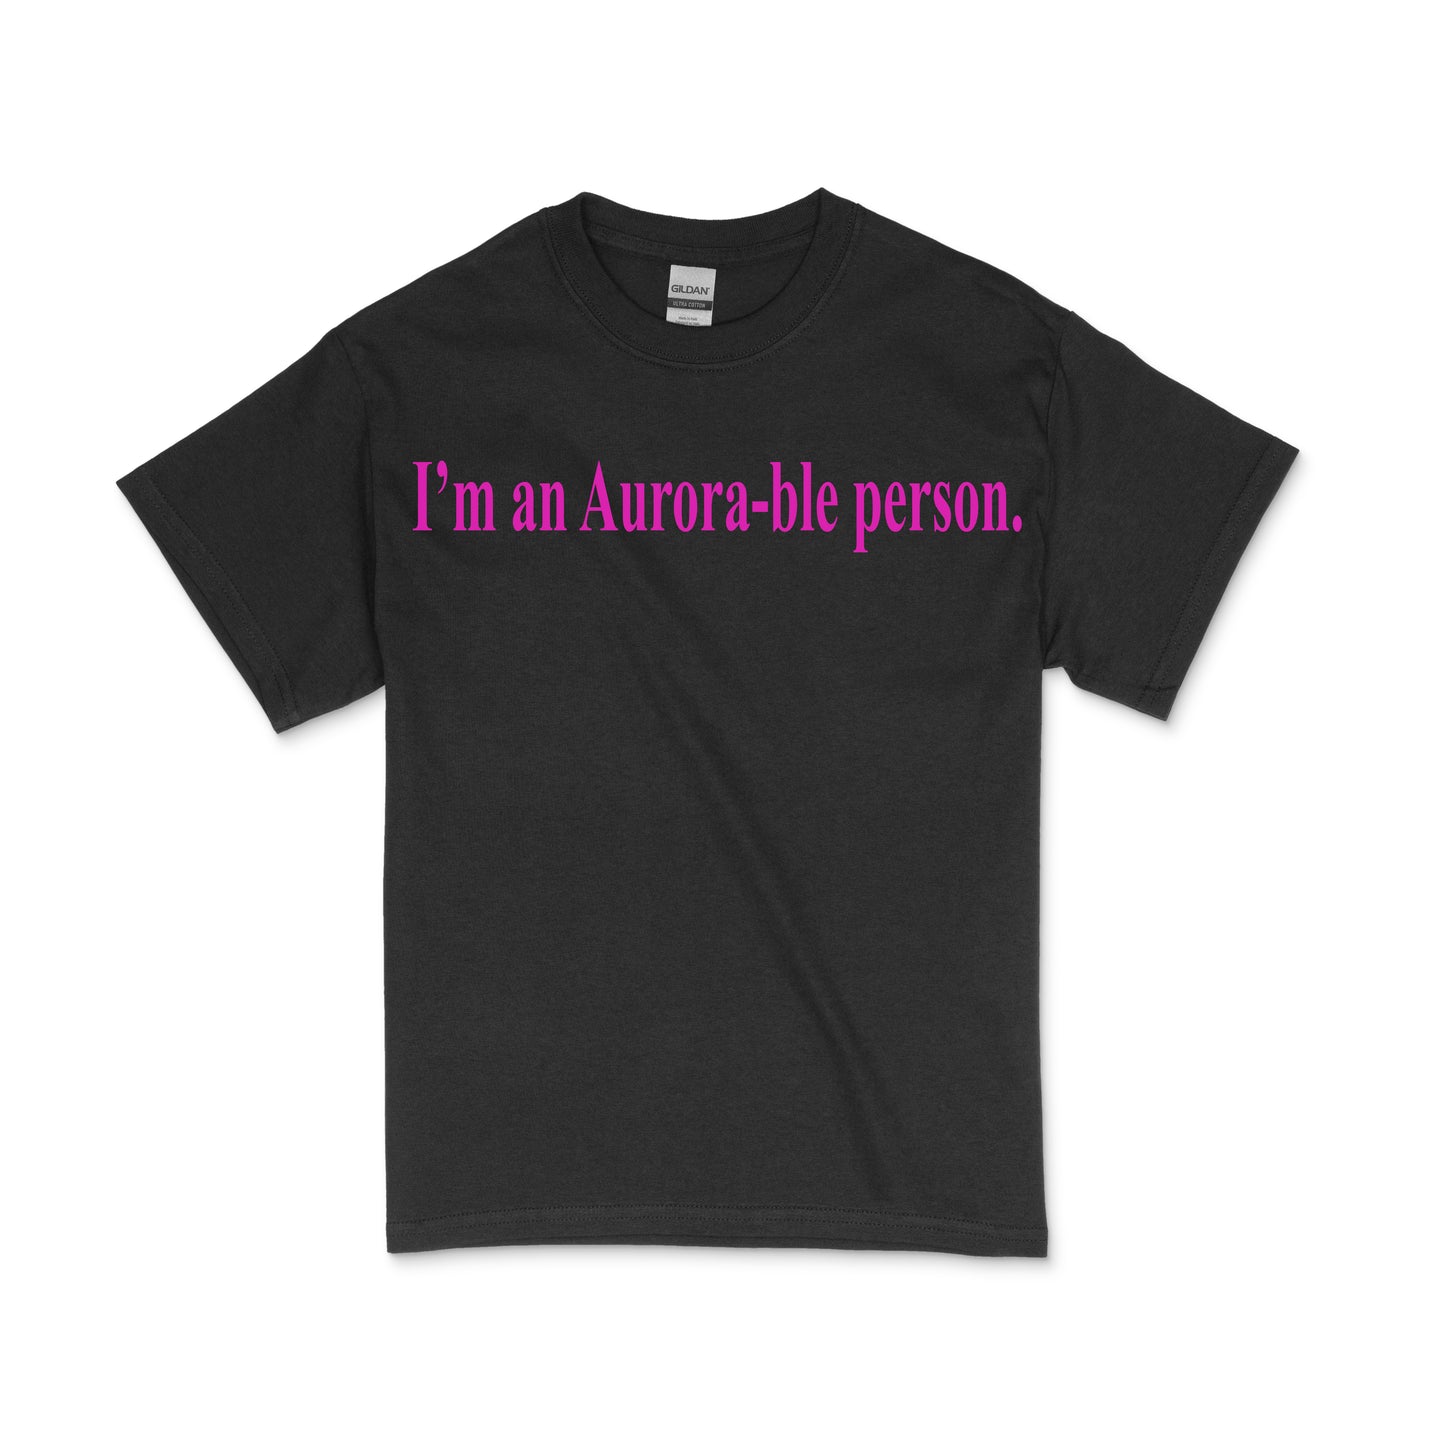 (Adult) I'm an Aurora-ble person. T- Shirt (Black shirt with pink text)